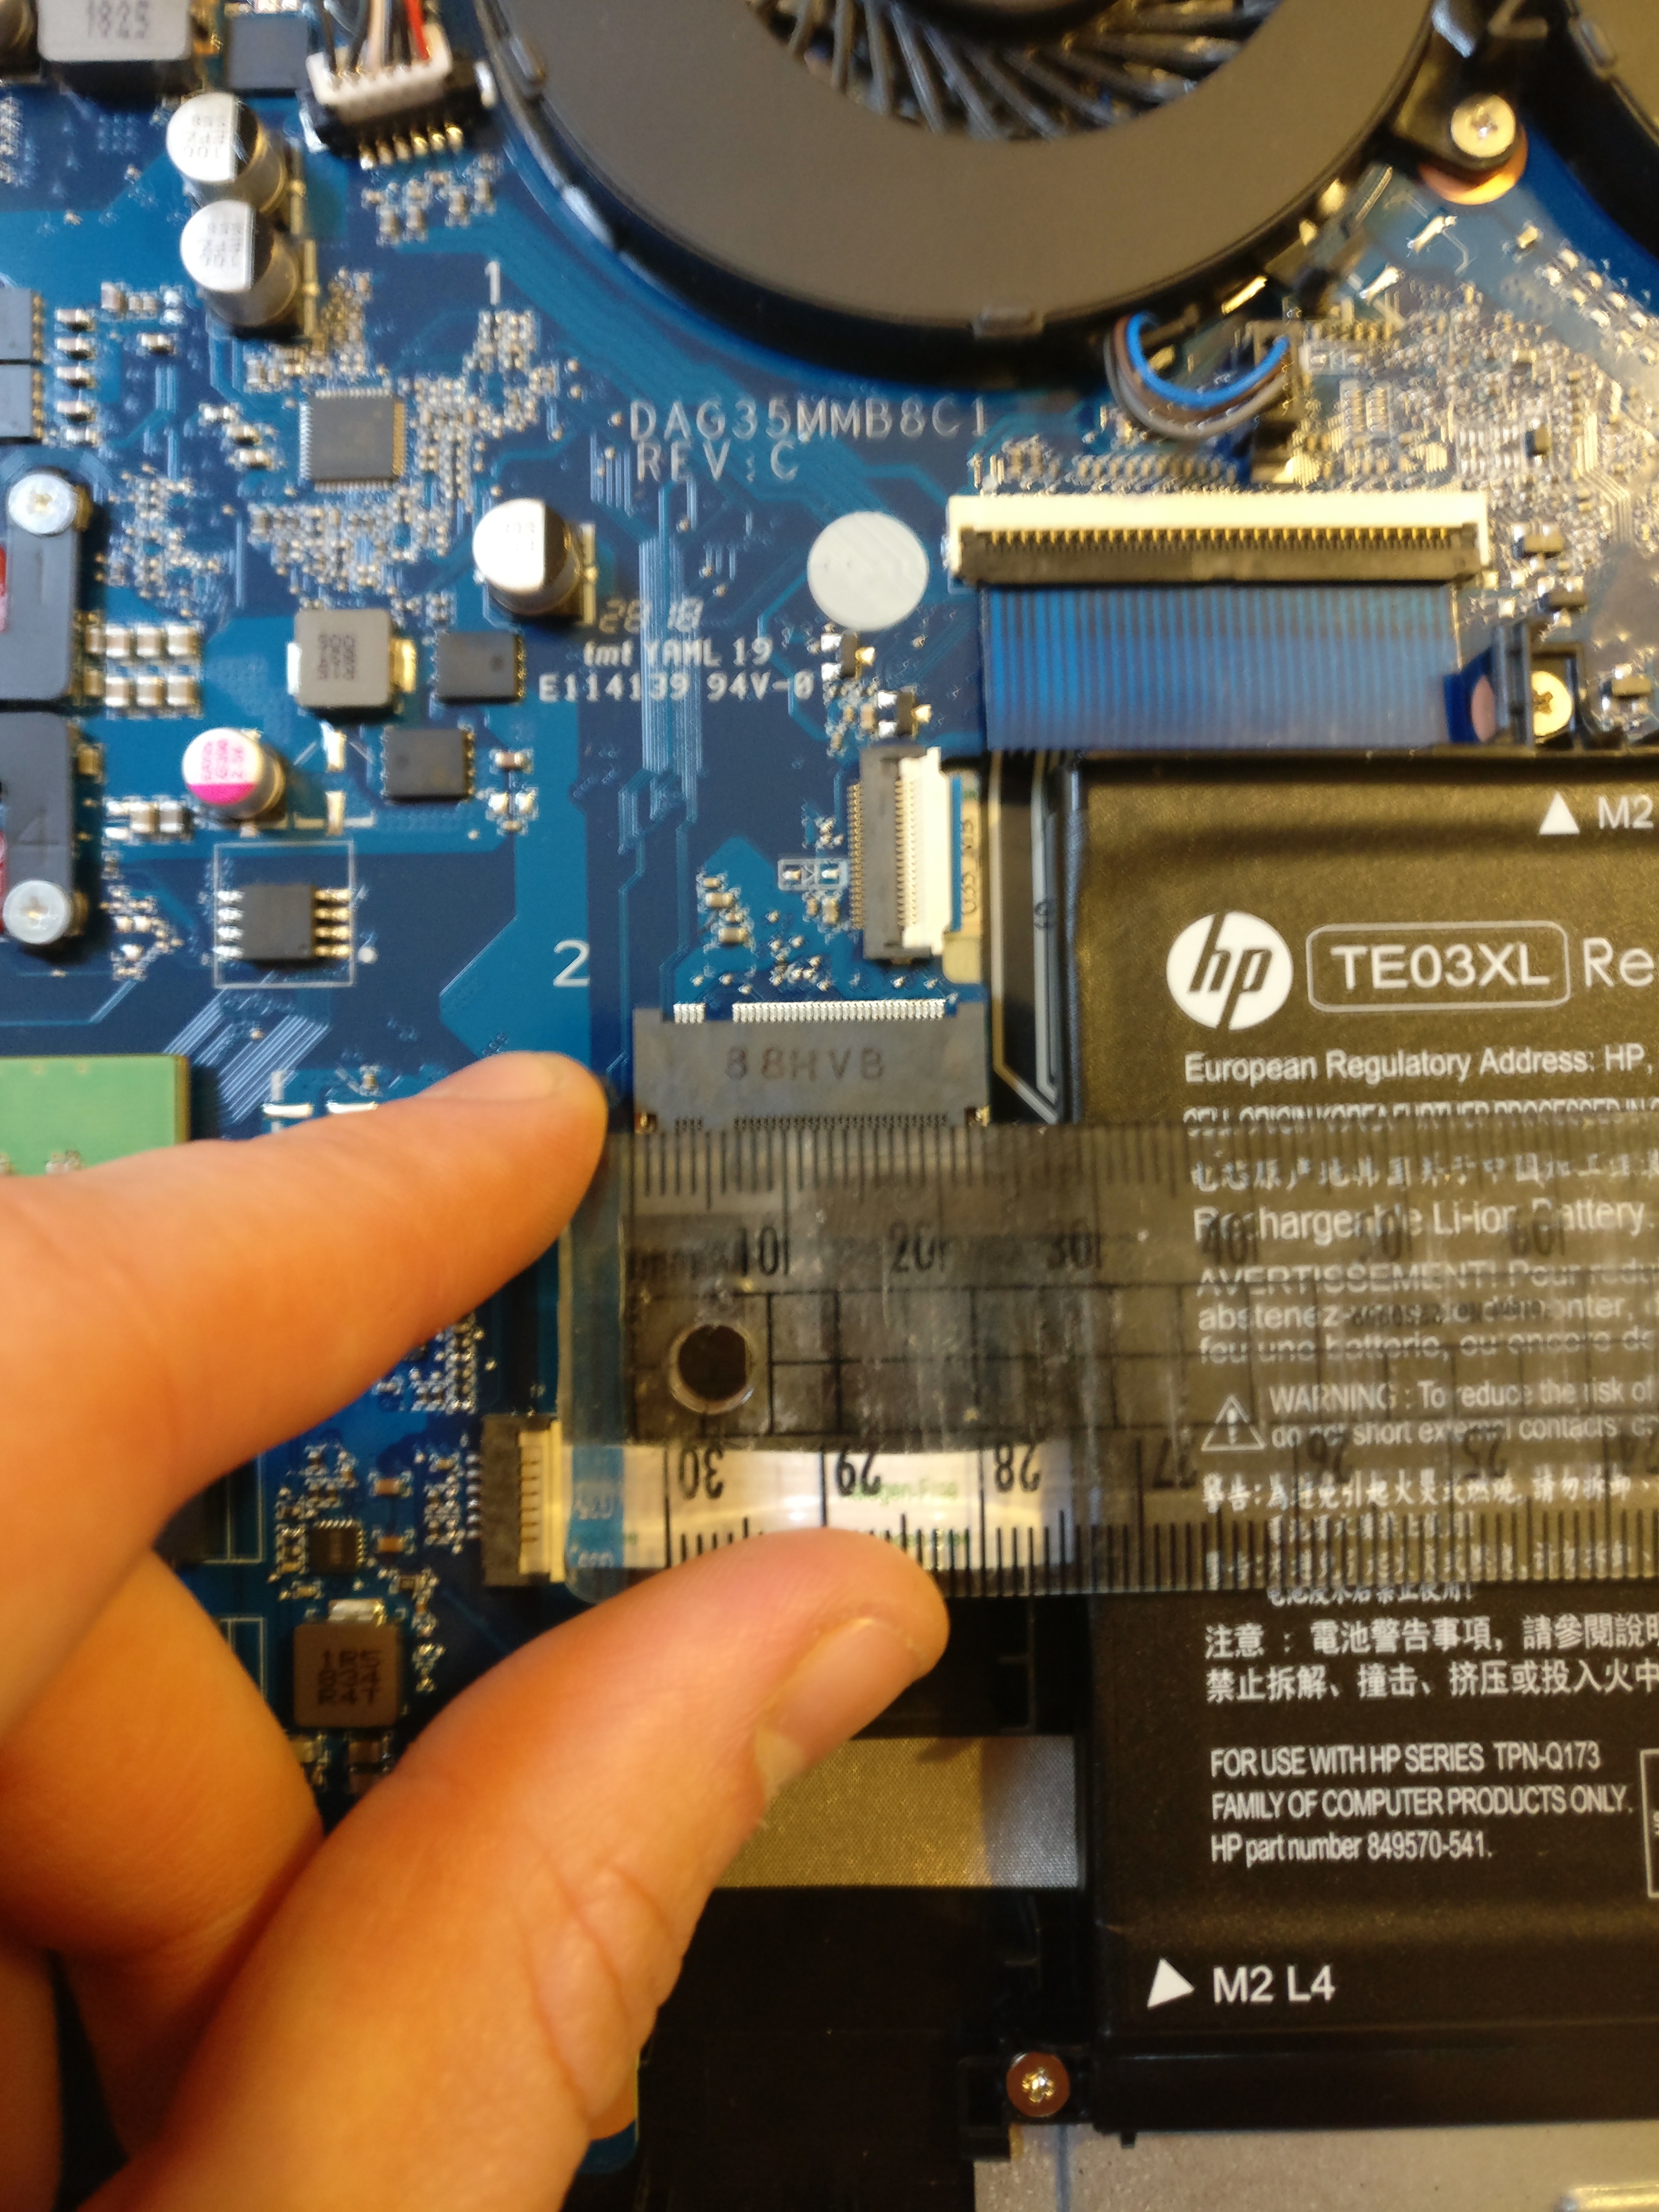 Ssd upgrade, using an M.2 - HP Support Community - 6930334